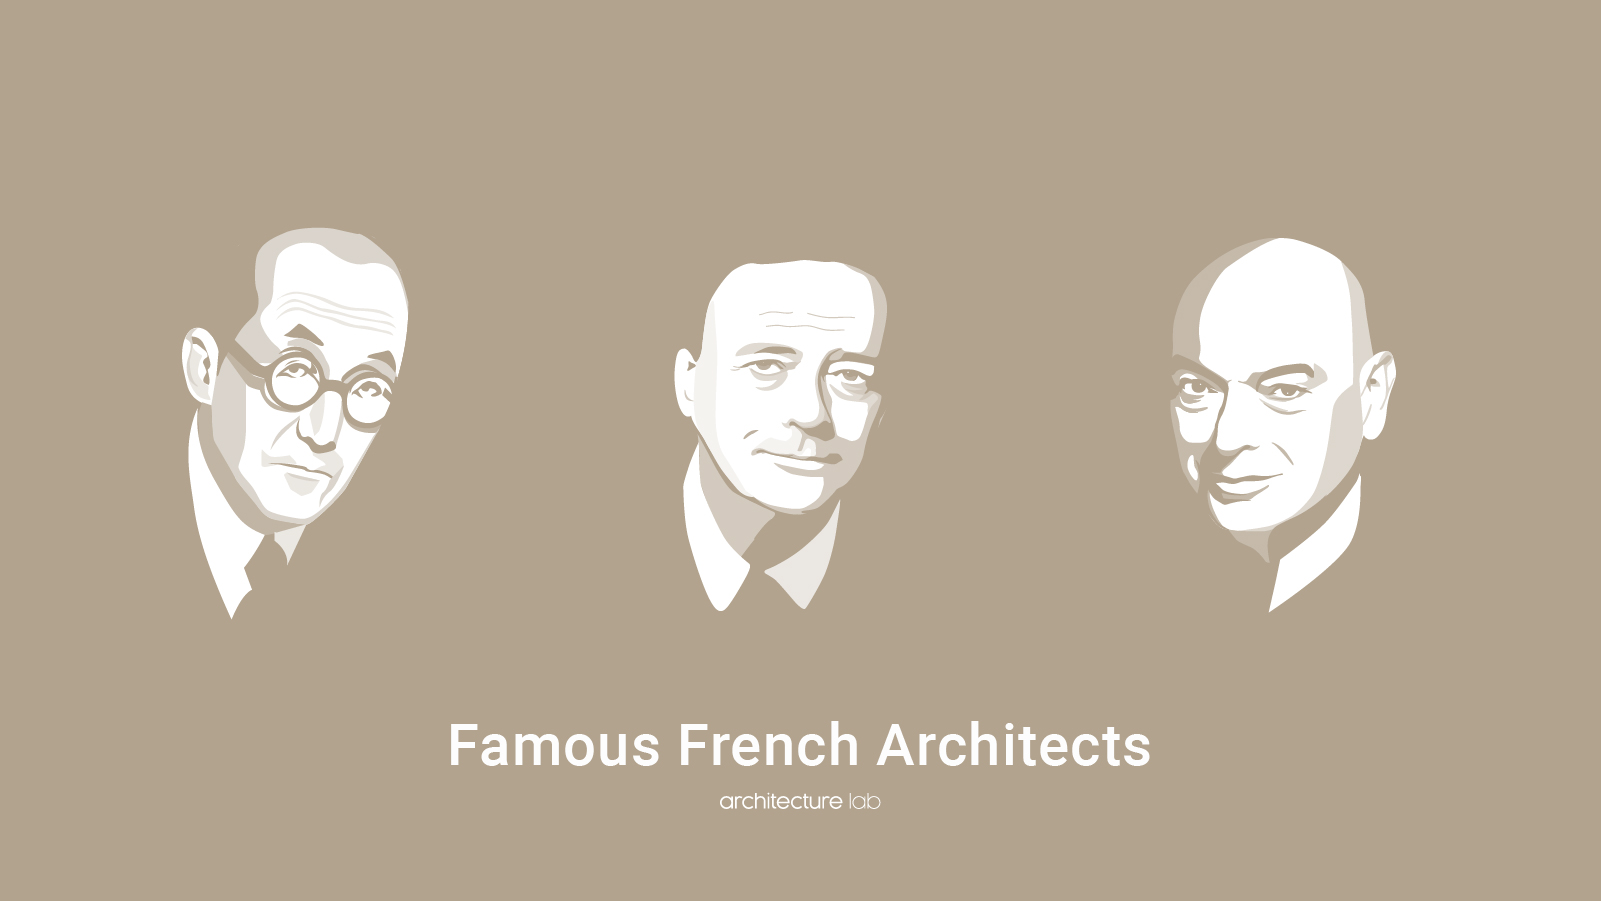 20 famous french architects and their proud works